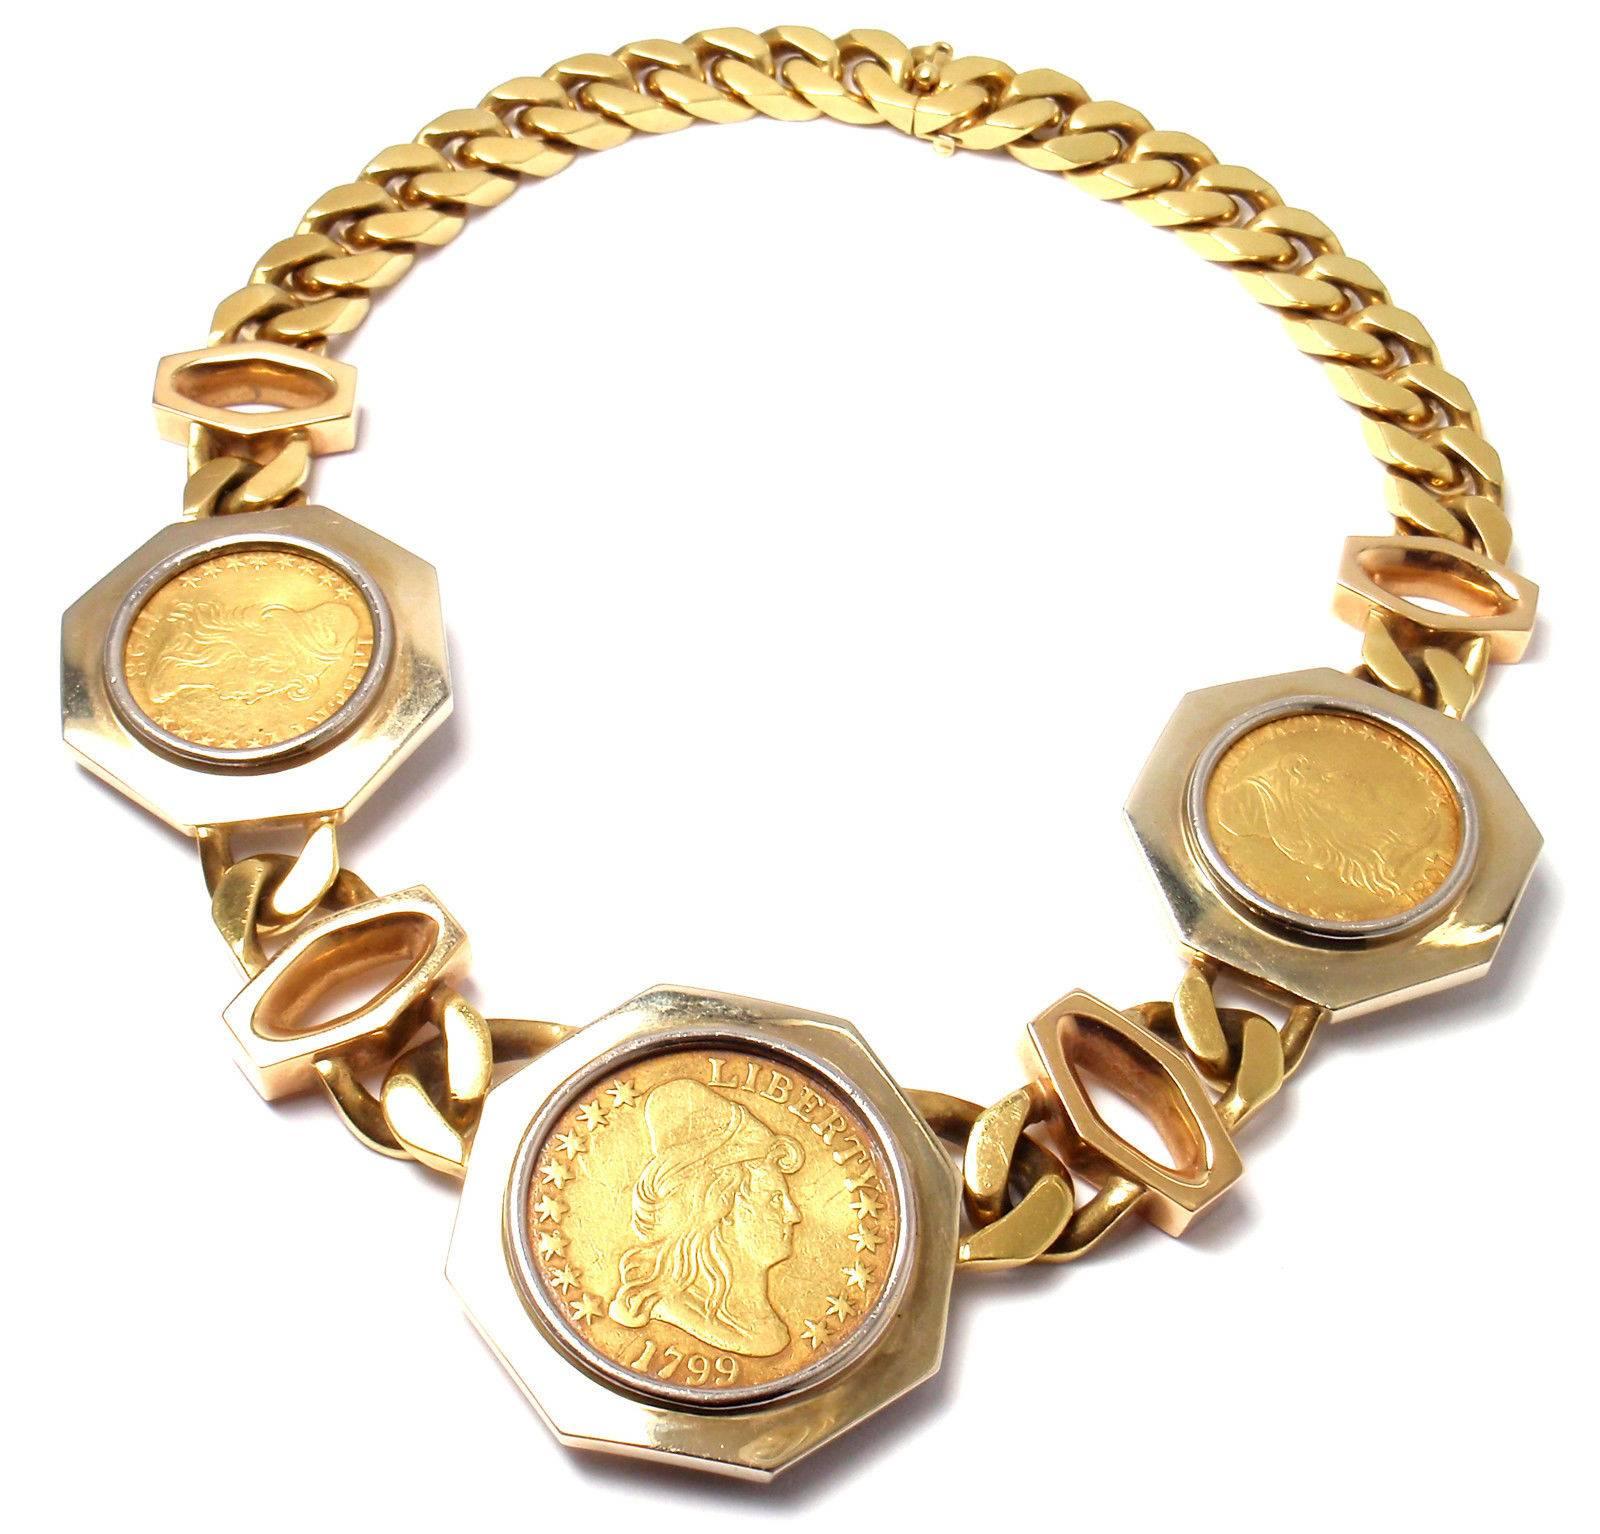 18k Yellow Gold Three Gold American Coins Heavy Large Link Necklace by Bulgari.

With 1 Large 34mm Gold draped liberty coin dated 1799
2 Smaller 26mm Gold draped liberty coins dated 1798 and 1807
*** According to the coin grading company PCGS